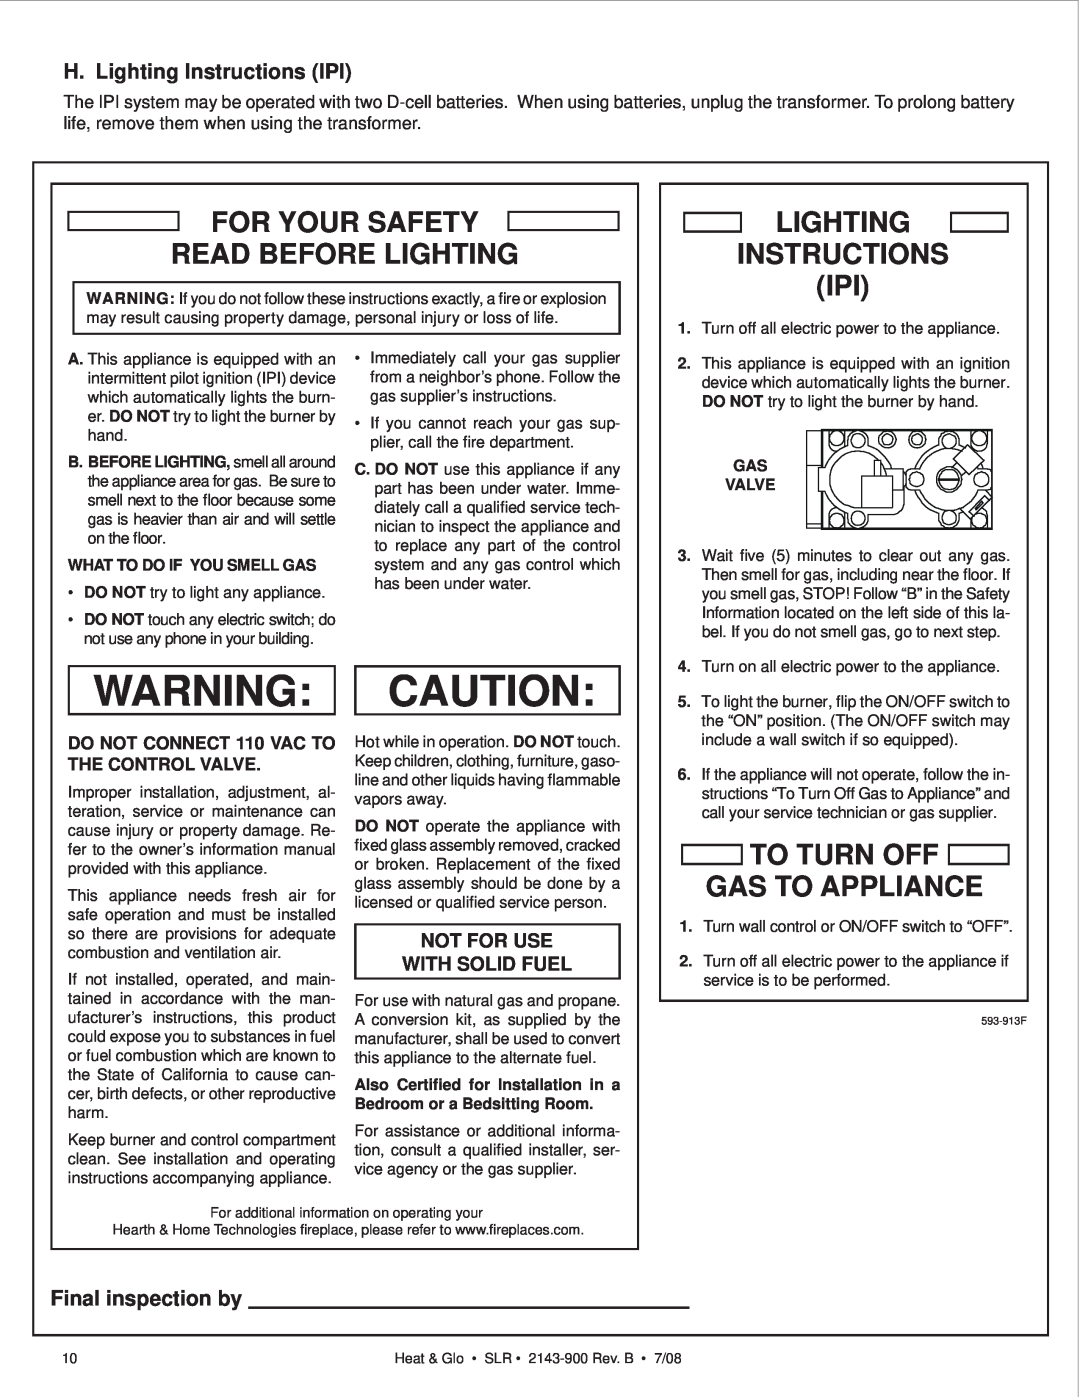 Heat & Glo LifeStyle SLR (COSMO) H. Lighting Instructions IPI, Final inspection by, Warning: Caution, Gas Valve 